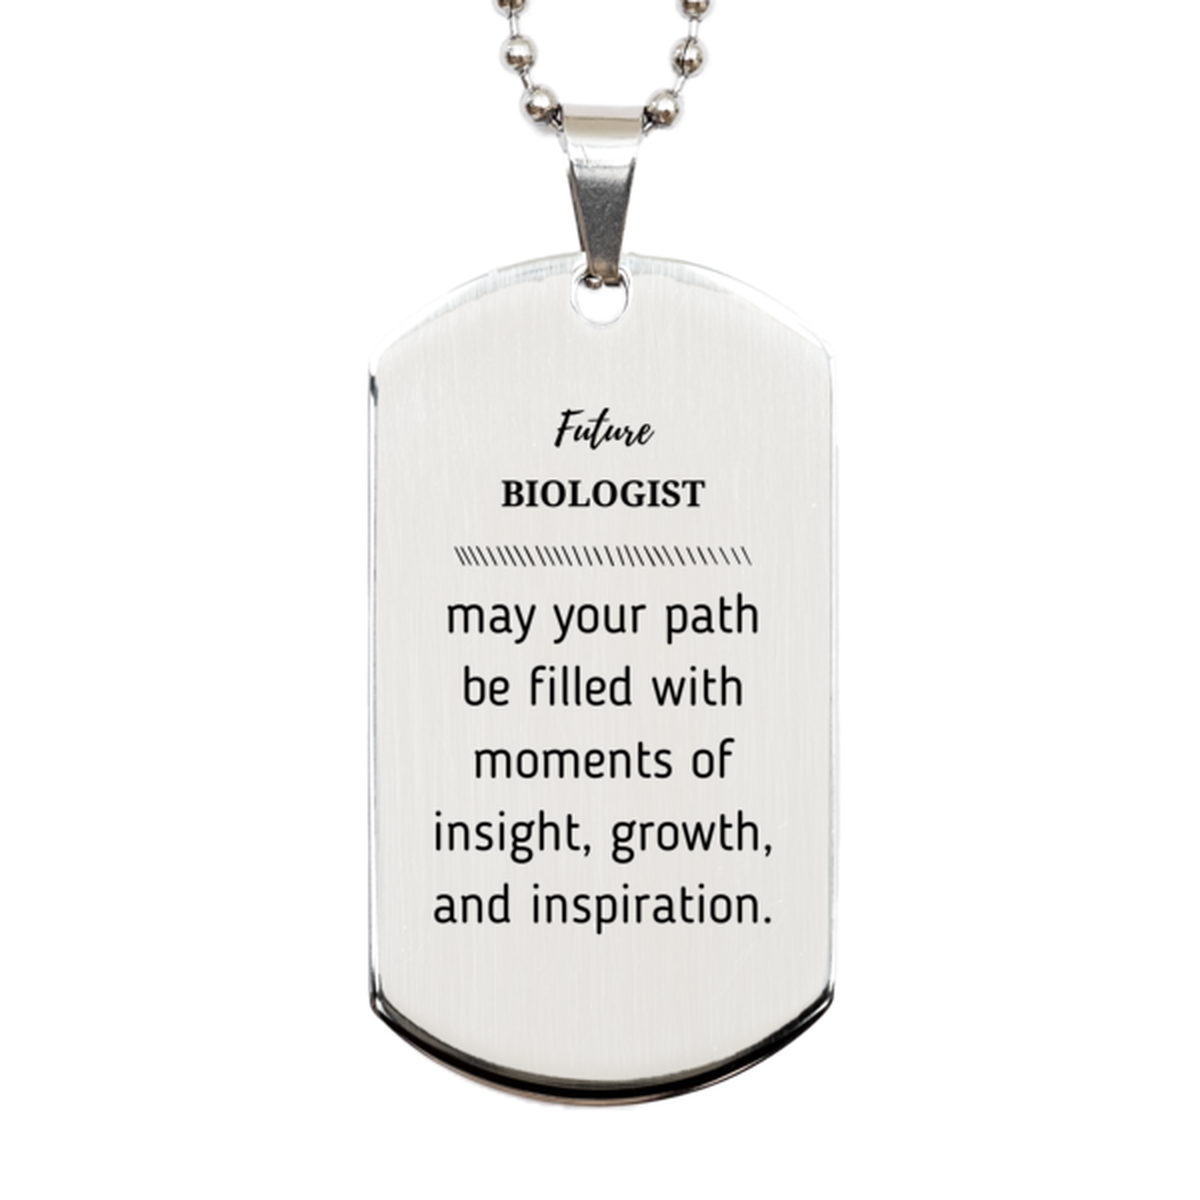 Future Biologist Gifts, May your path be filled with moments of insight, Graduation Gifts for New Biologist, Christmas Unique Silver Dog Tag For Men, Women, Friends